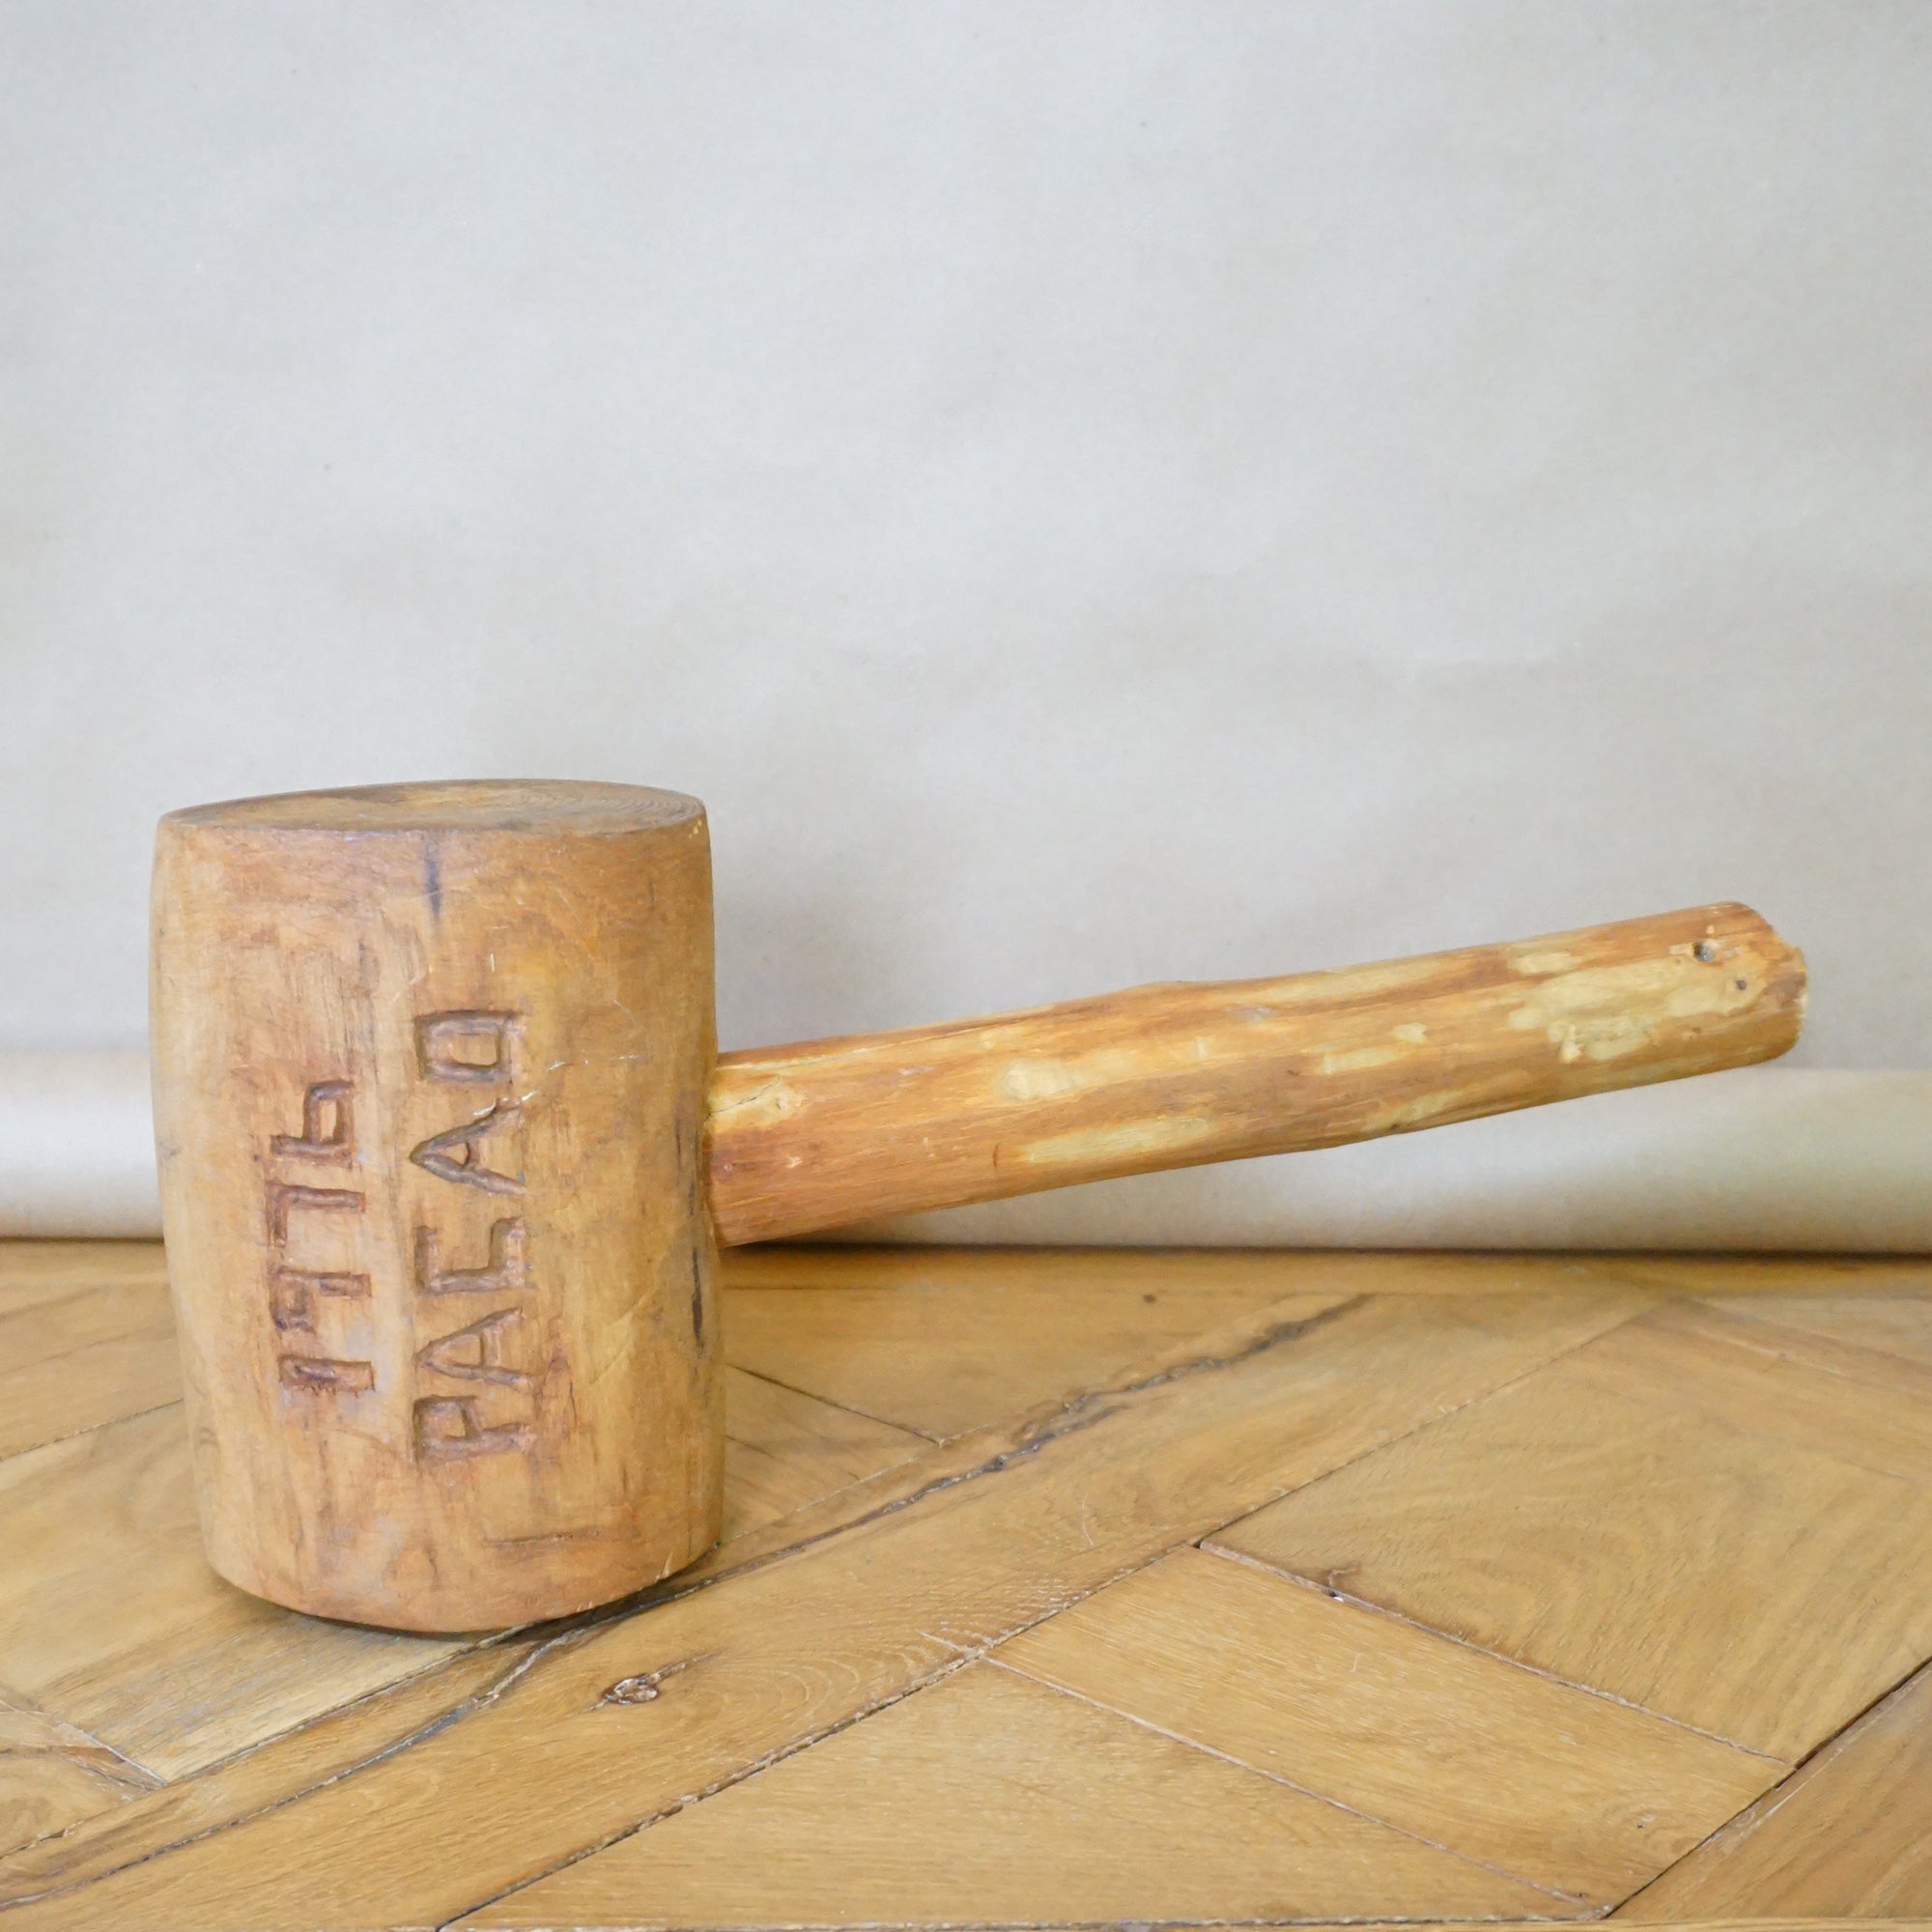 1970s Vintage Large Wooden Mallet Primitive Hammer "1976 Pacao". 14" tall.